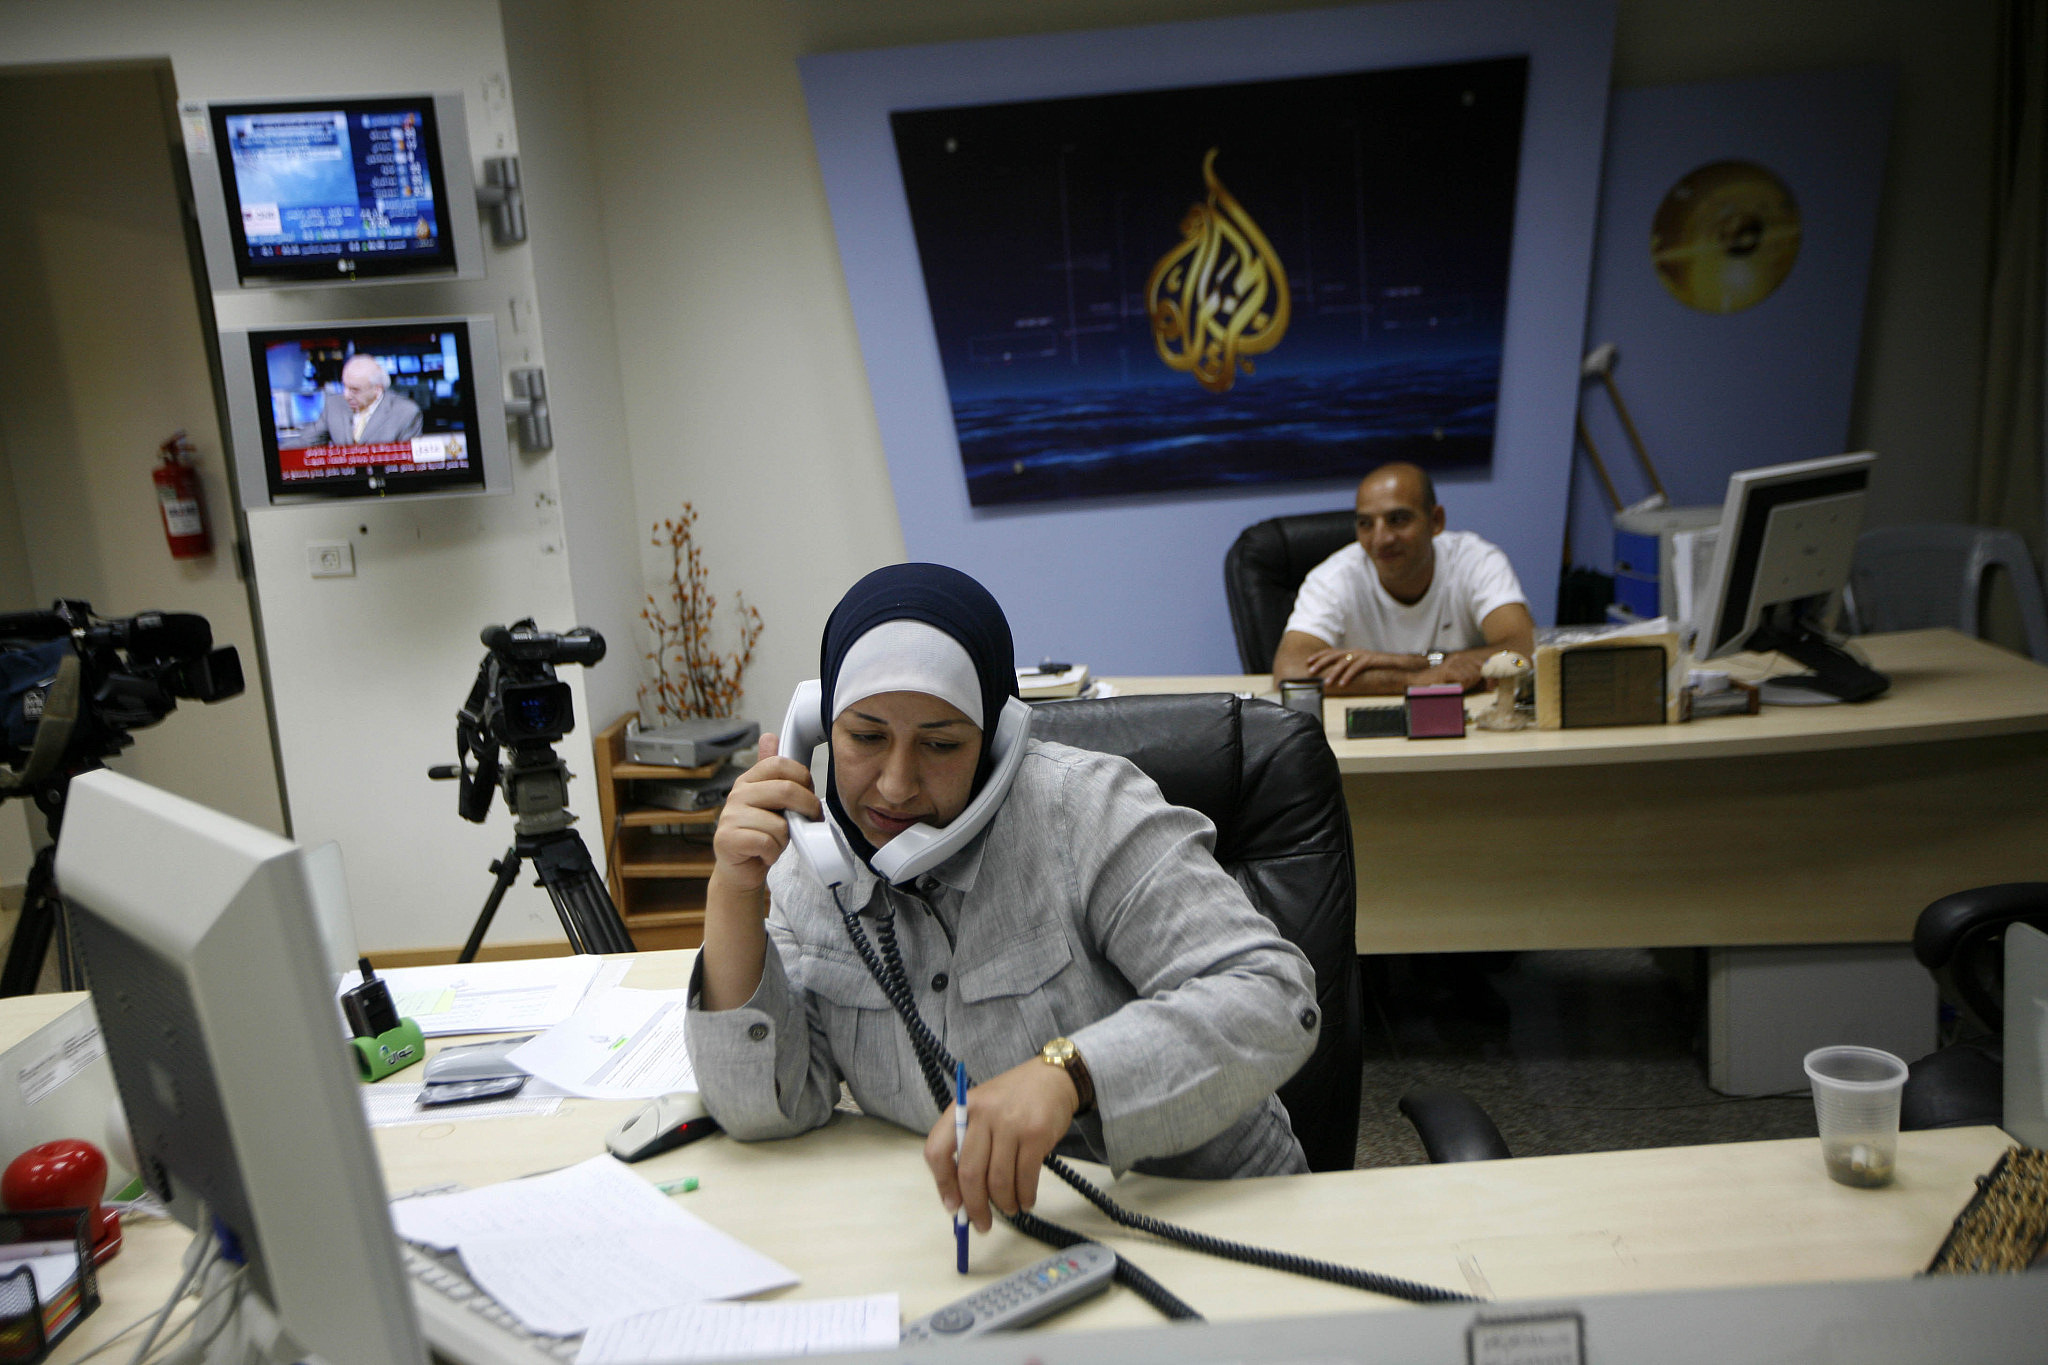 A Palestinian woman works at the Al Jazeera TV station in the West Bank city of Ramallah, June 14, 2009. (Miriam Alster/Flash90)